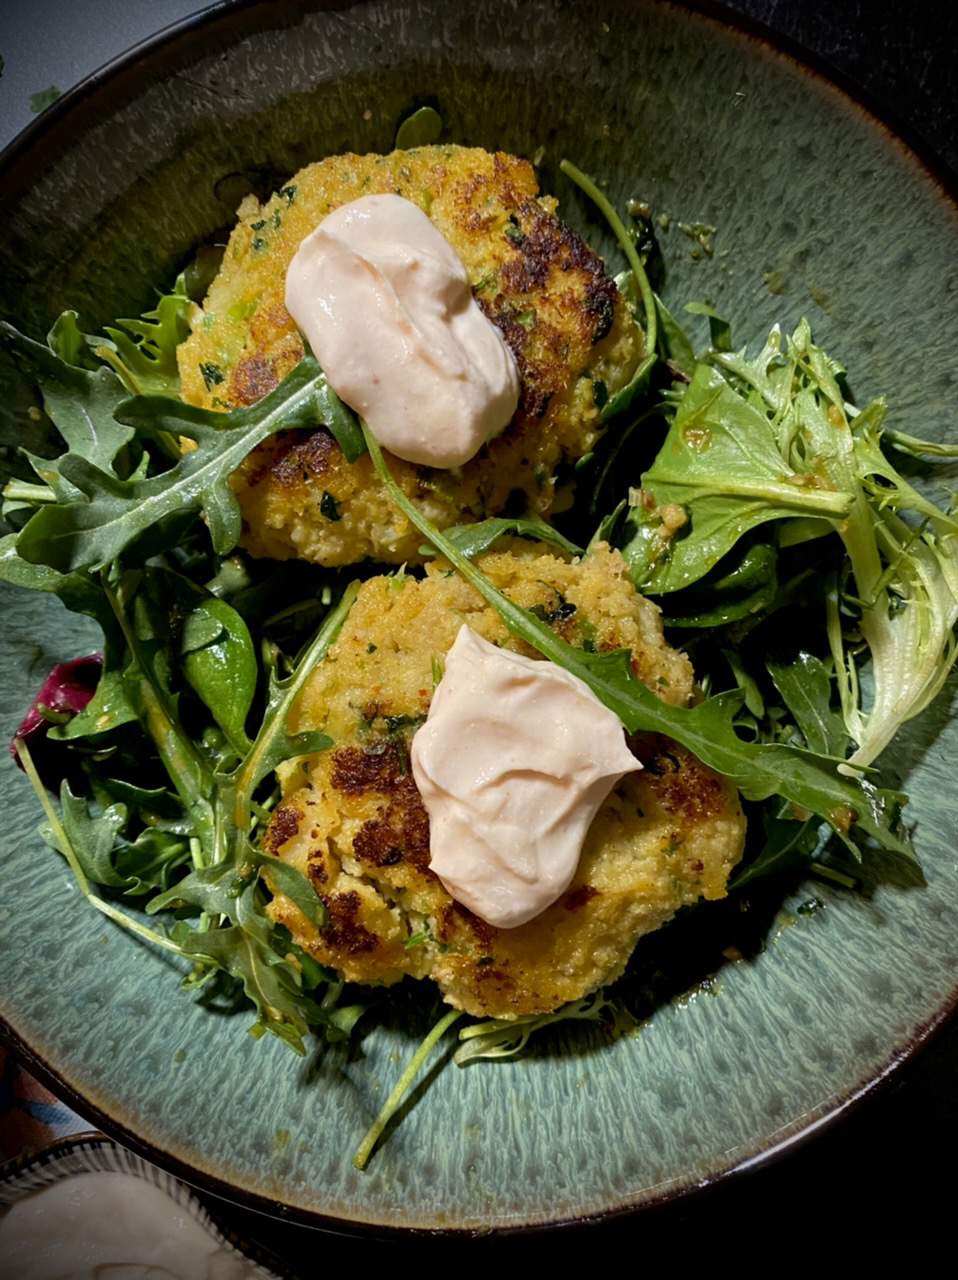 D4FE06C7 A0CC 4BC0 B1A1 D4E29B76DC0F - Asian Cod Fish Cakes with Spring Mix Salad